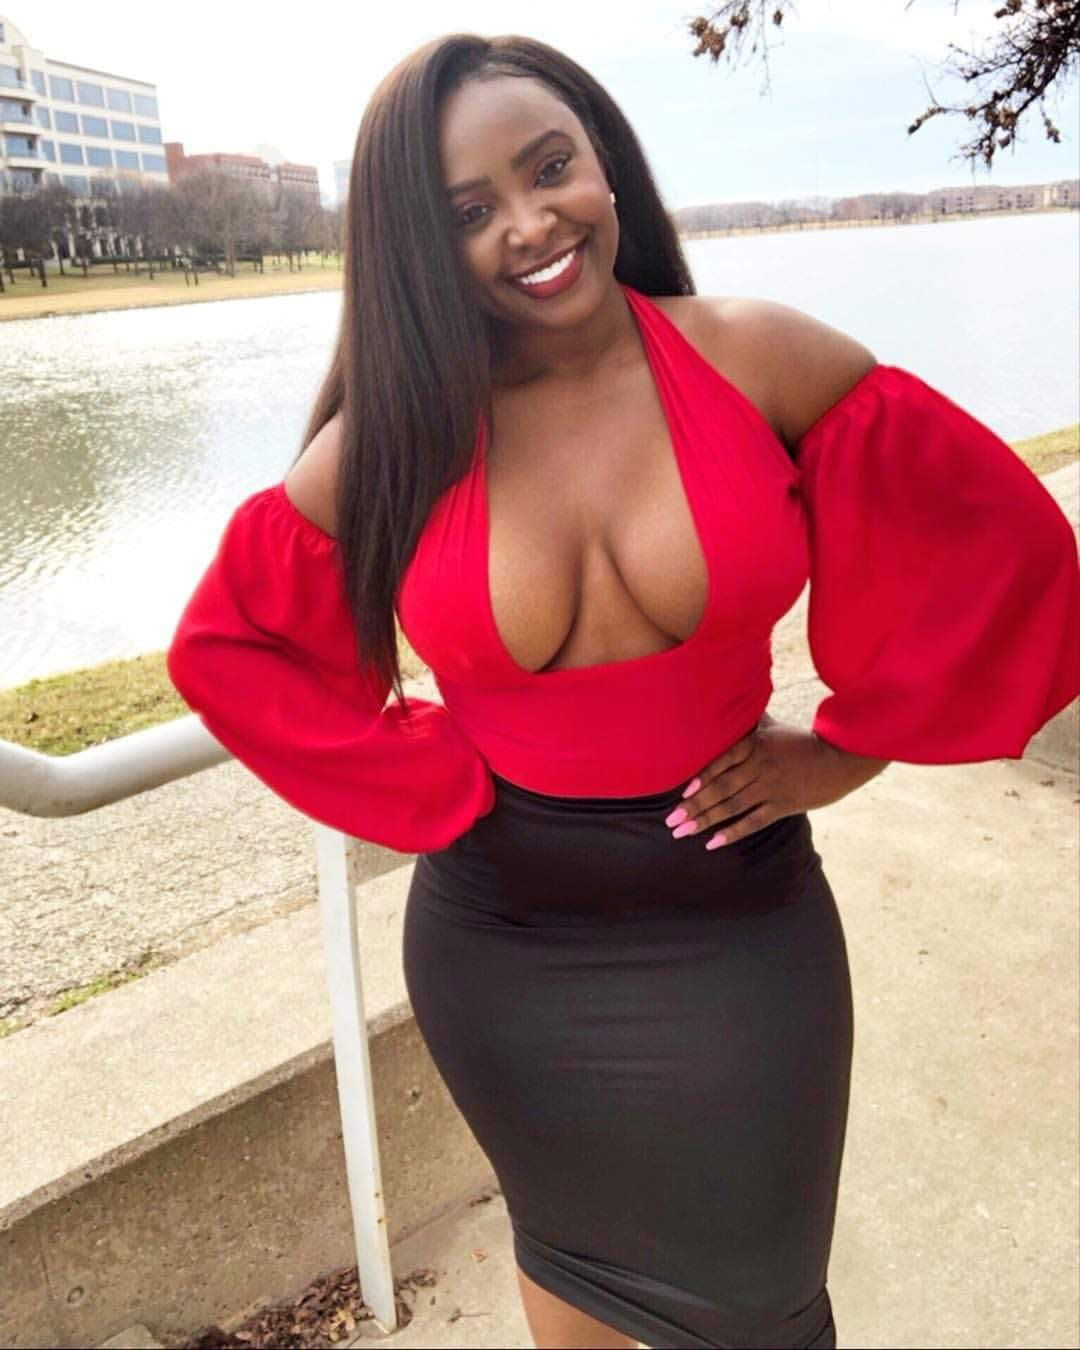 Photo by Bacon923 with the username @Bacon923,  June 22, 2022 at 11:35 PM. The post is about the topic Ebony Excellence and the text says 'Ebony Delight Pt4
Comments Welcome'